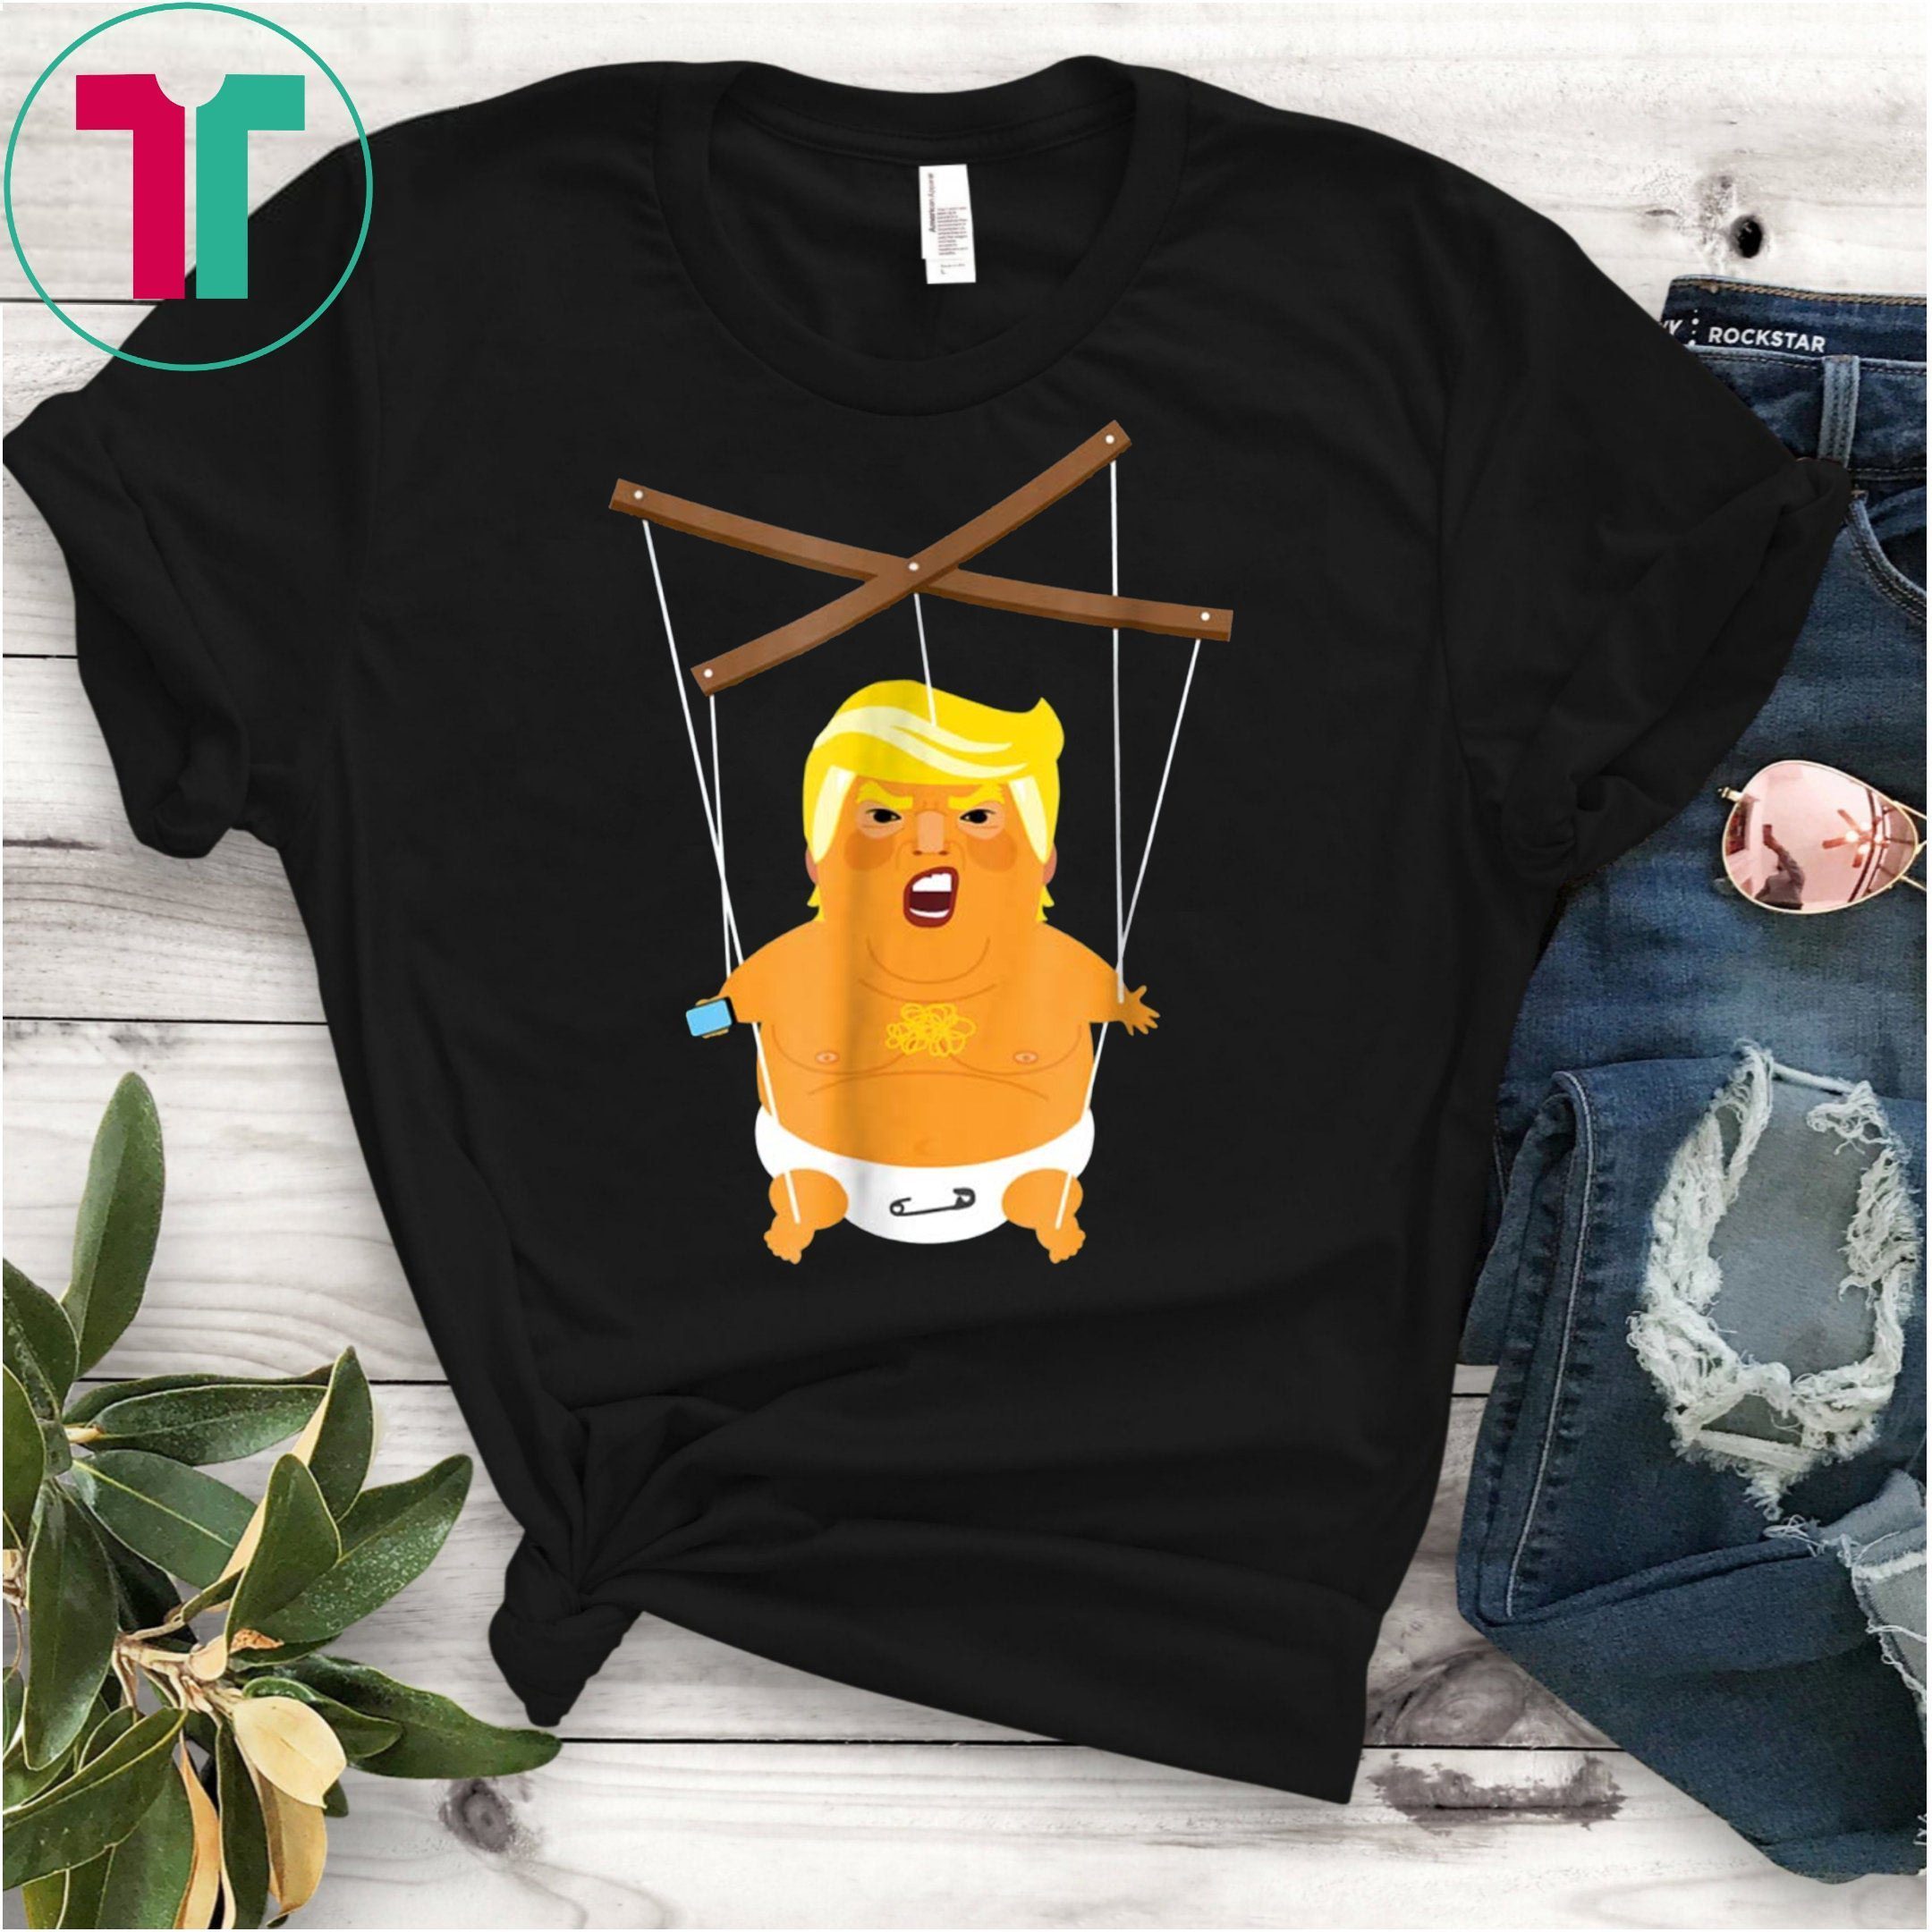 45 Is A Puppet Baby Trump Funny T-Shirt